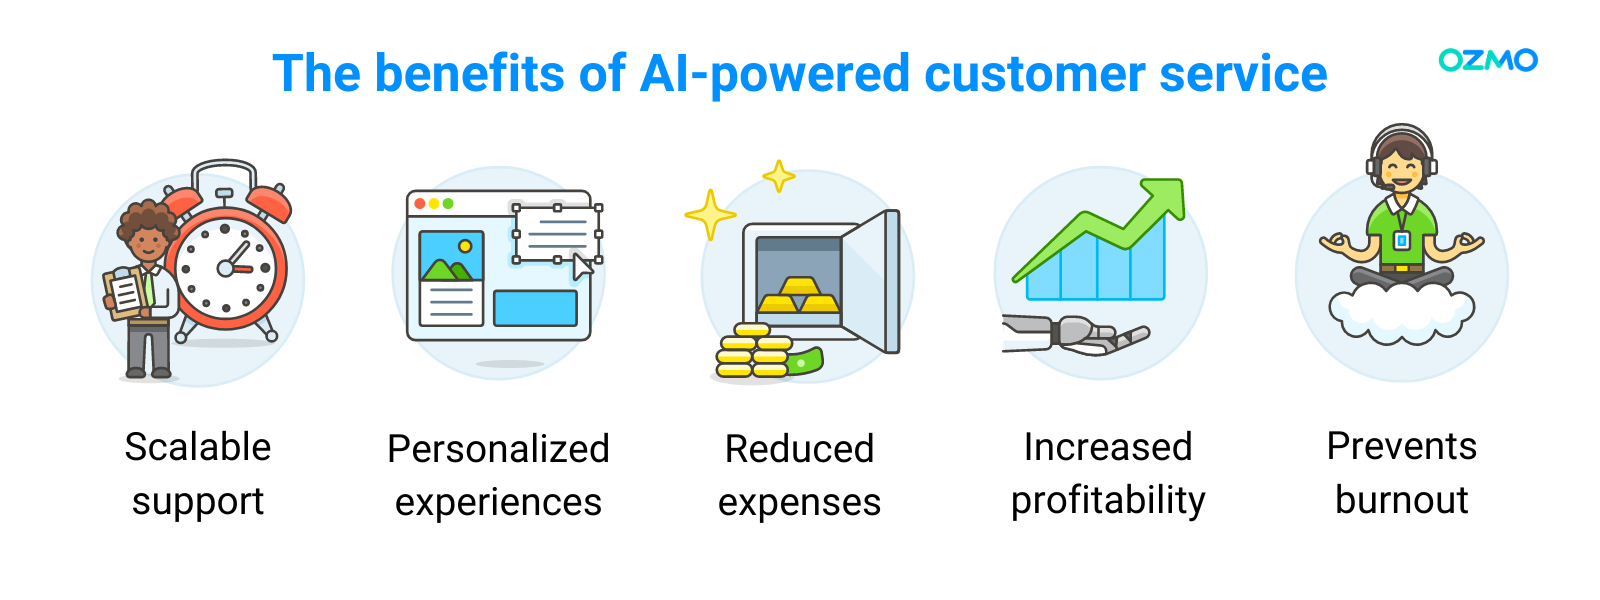 The benefits of AI-powered customer service: scalable support, personalized experiences, reduced expenses, increased profitability, prevents burnout